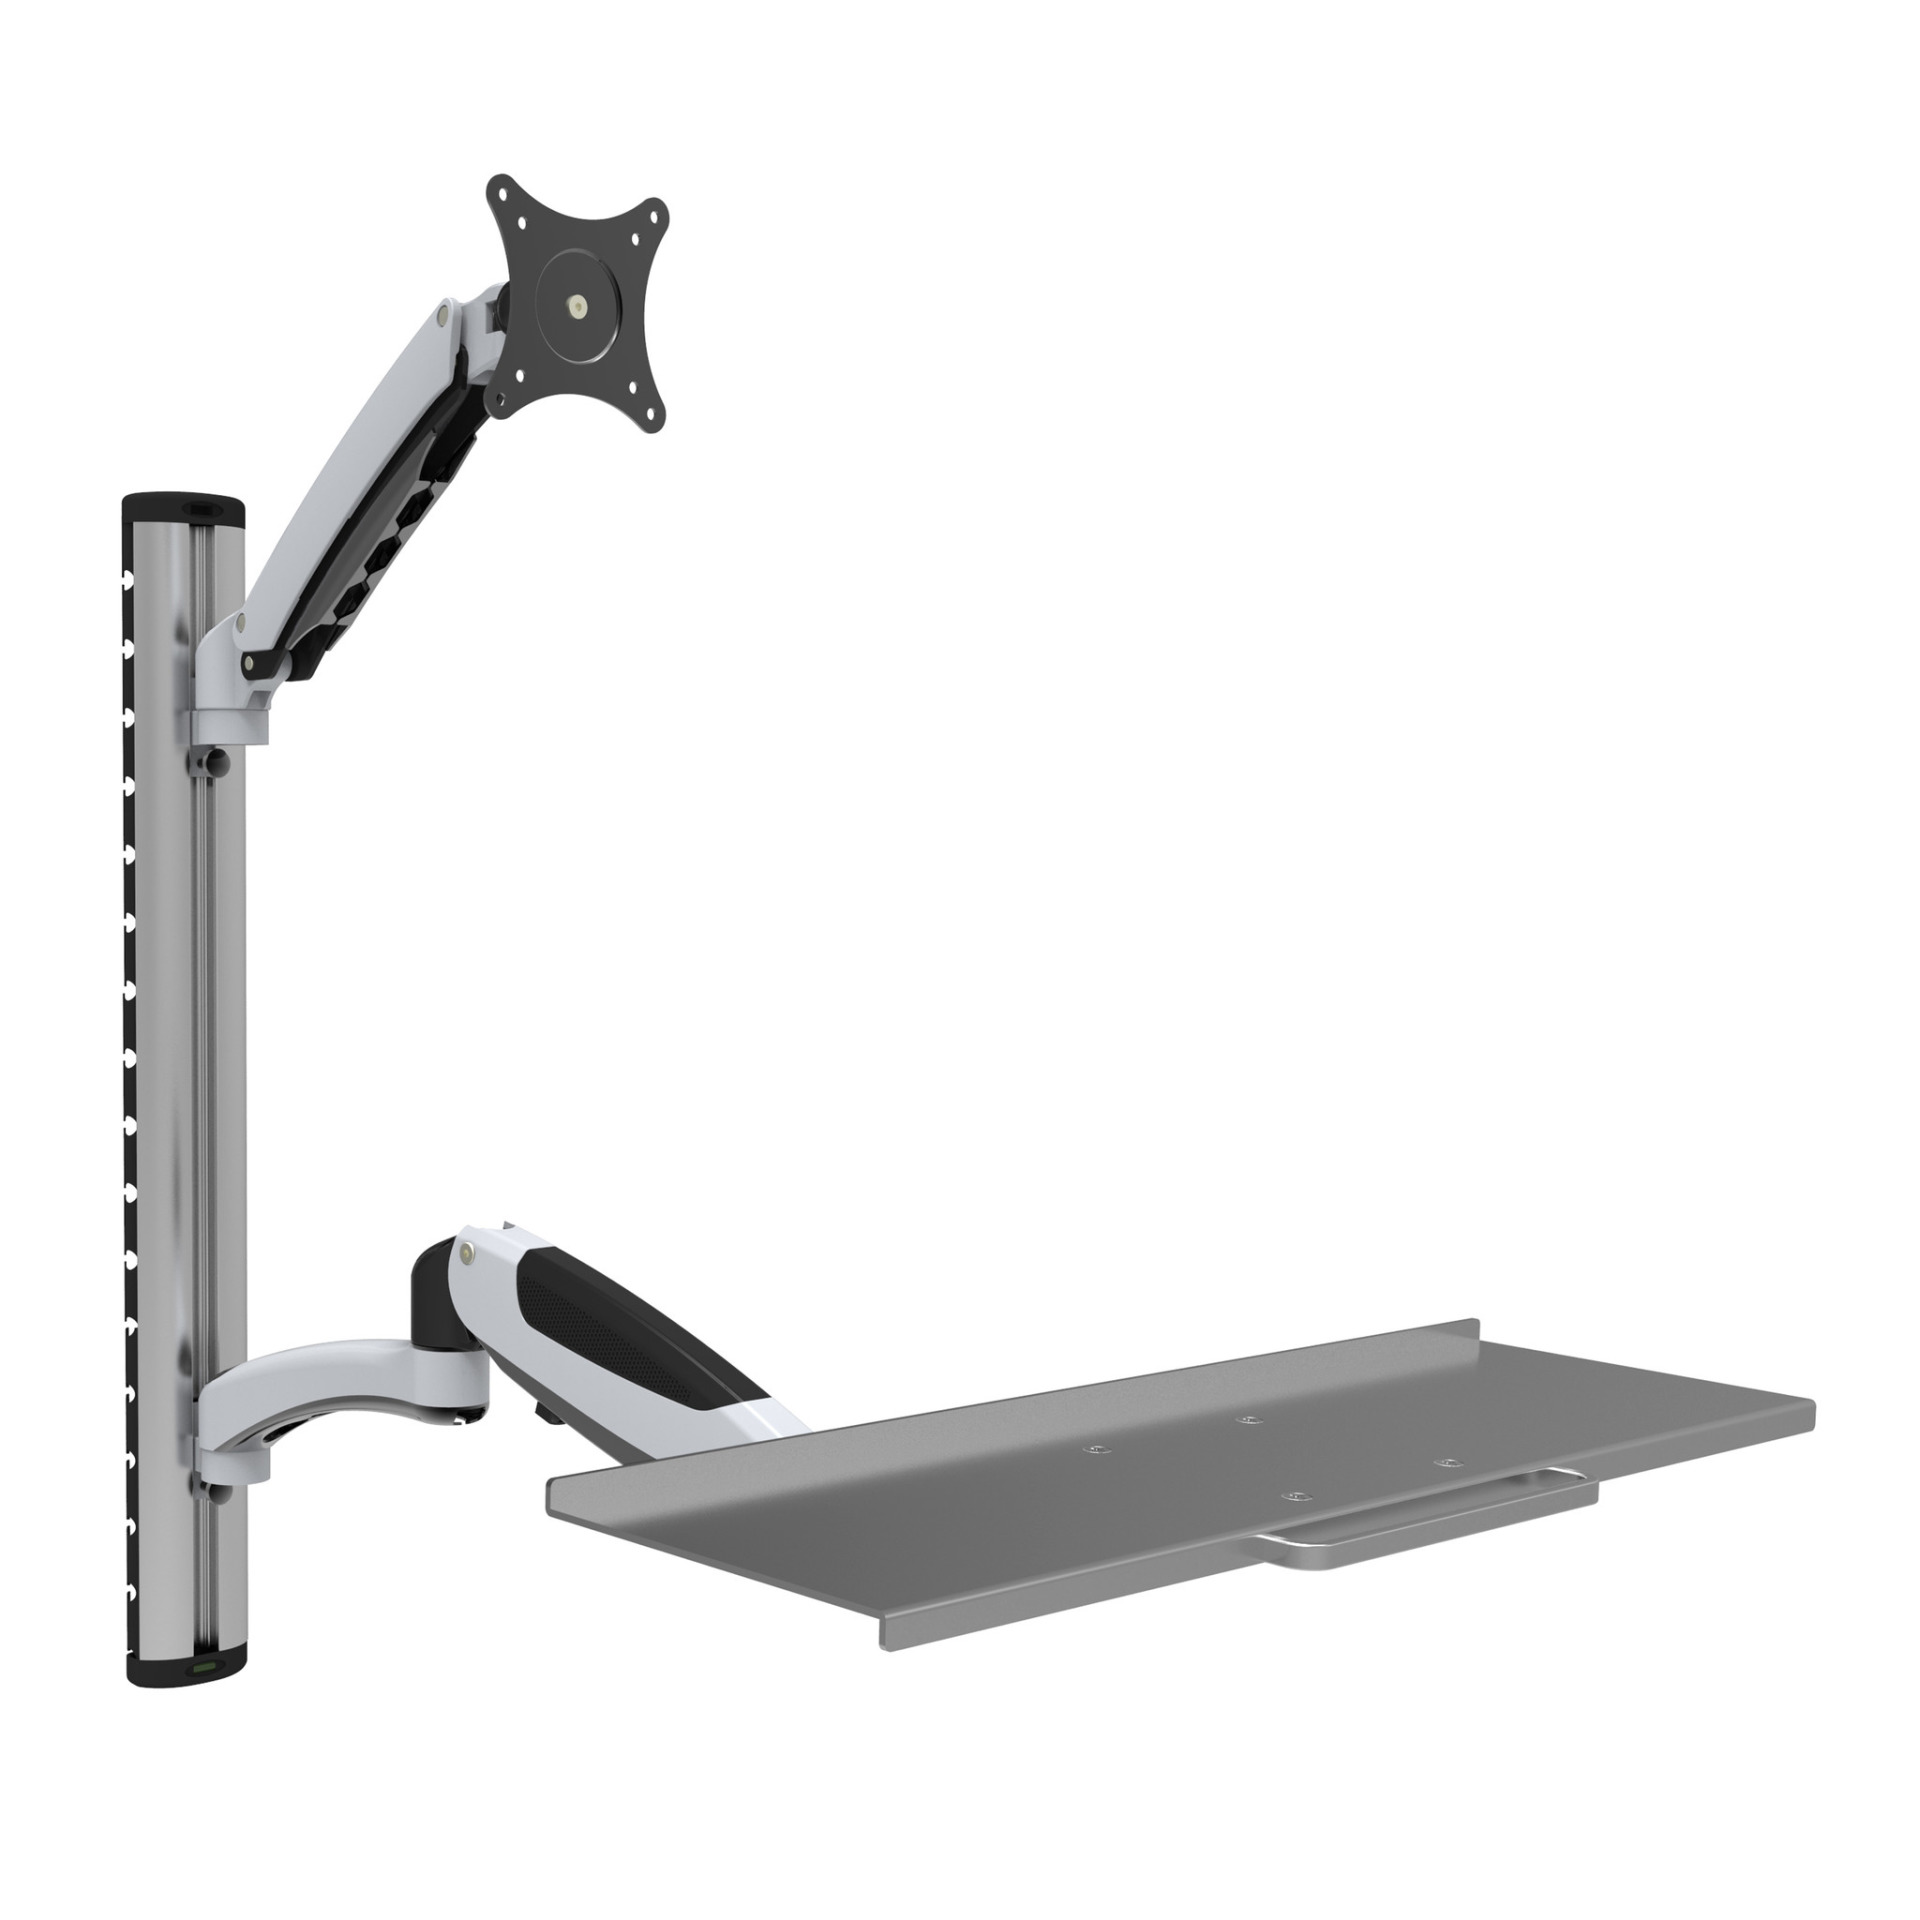 Wall bracket for 1 LCD 15"-27" adjustable shelf and LCD support